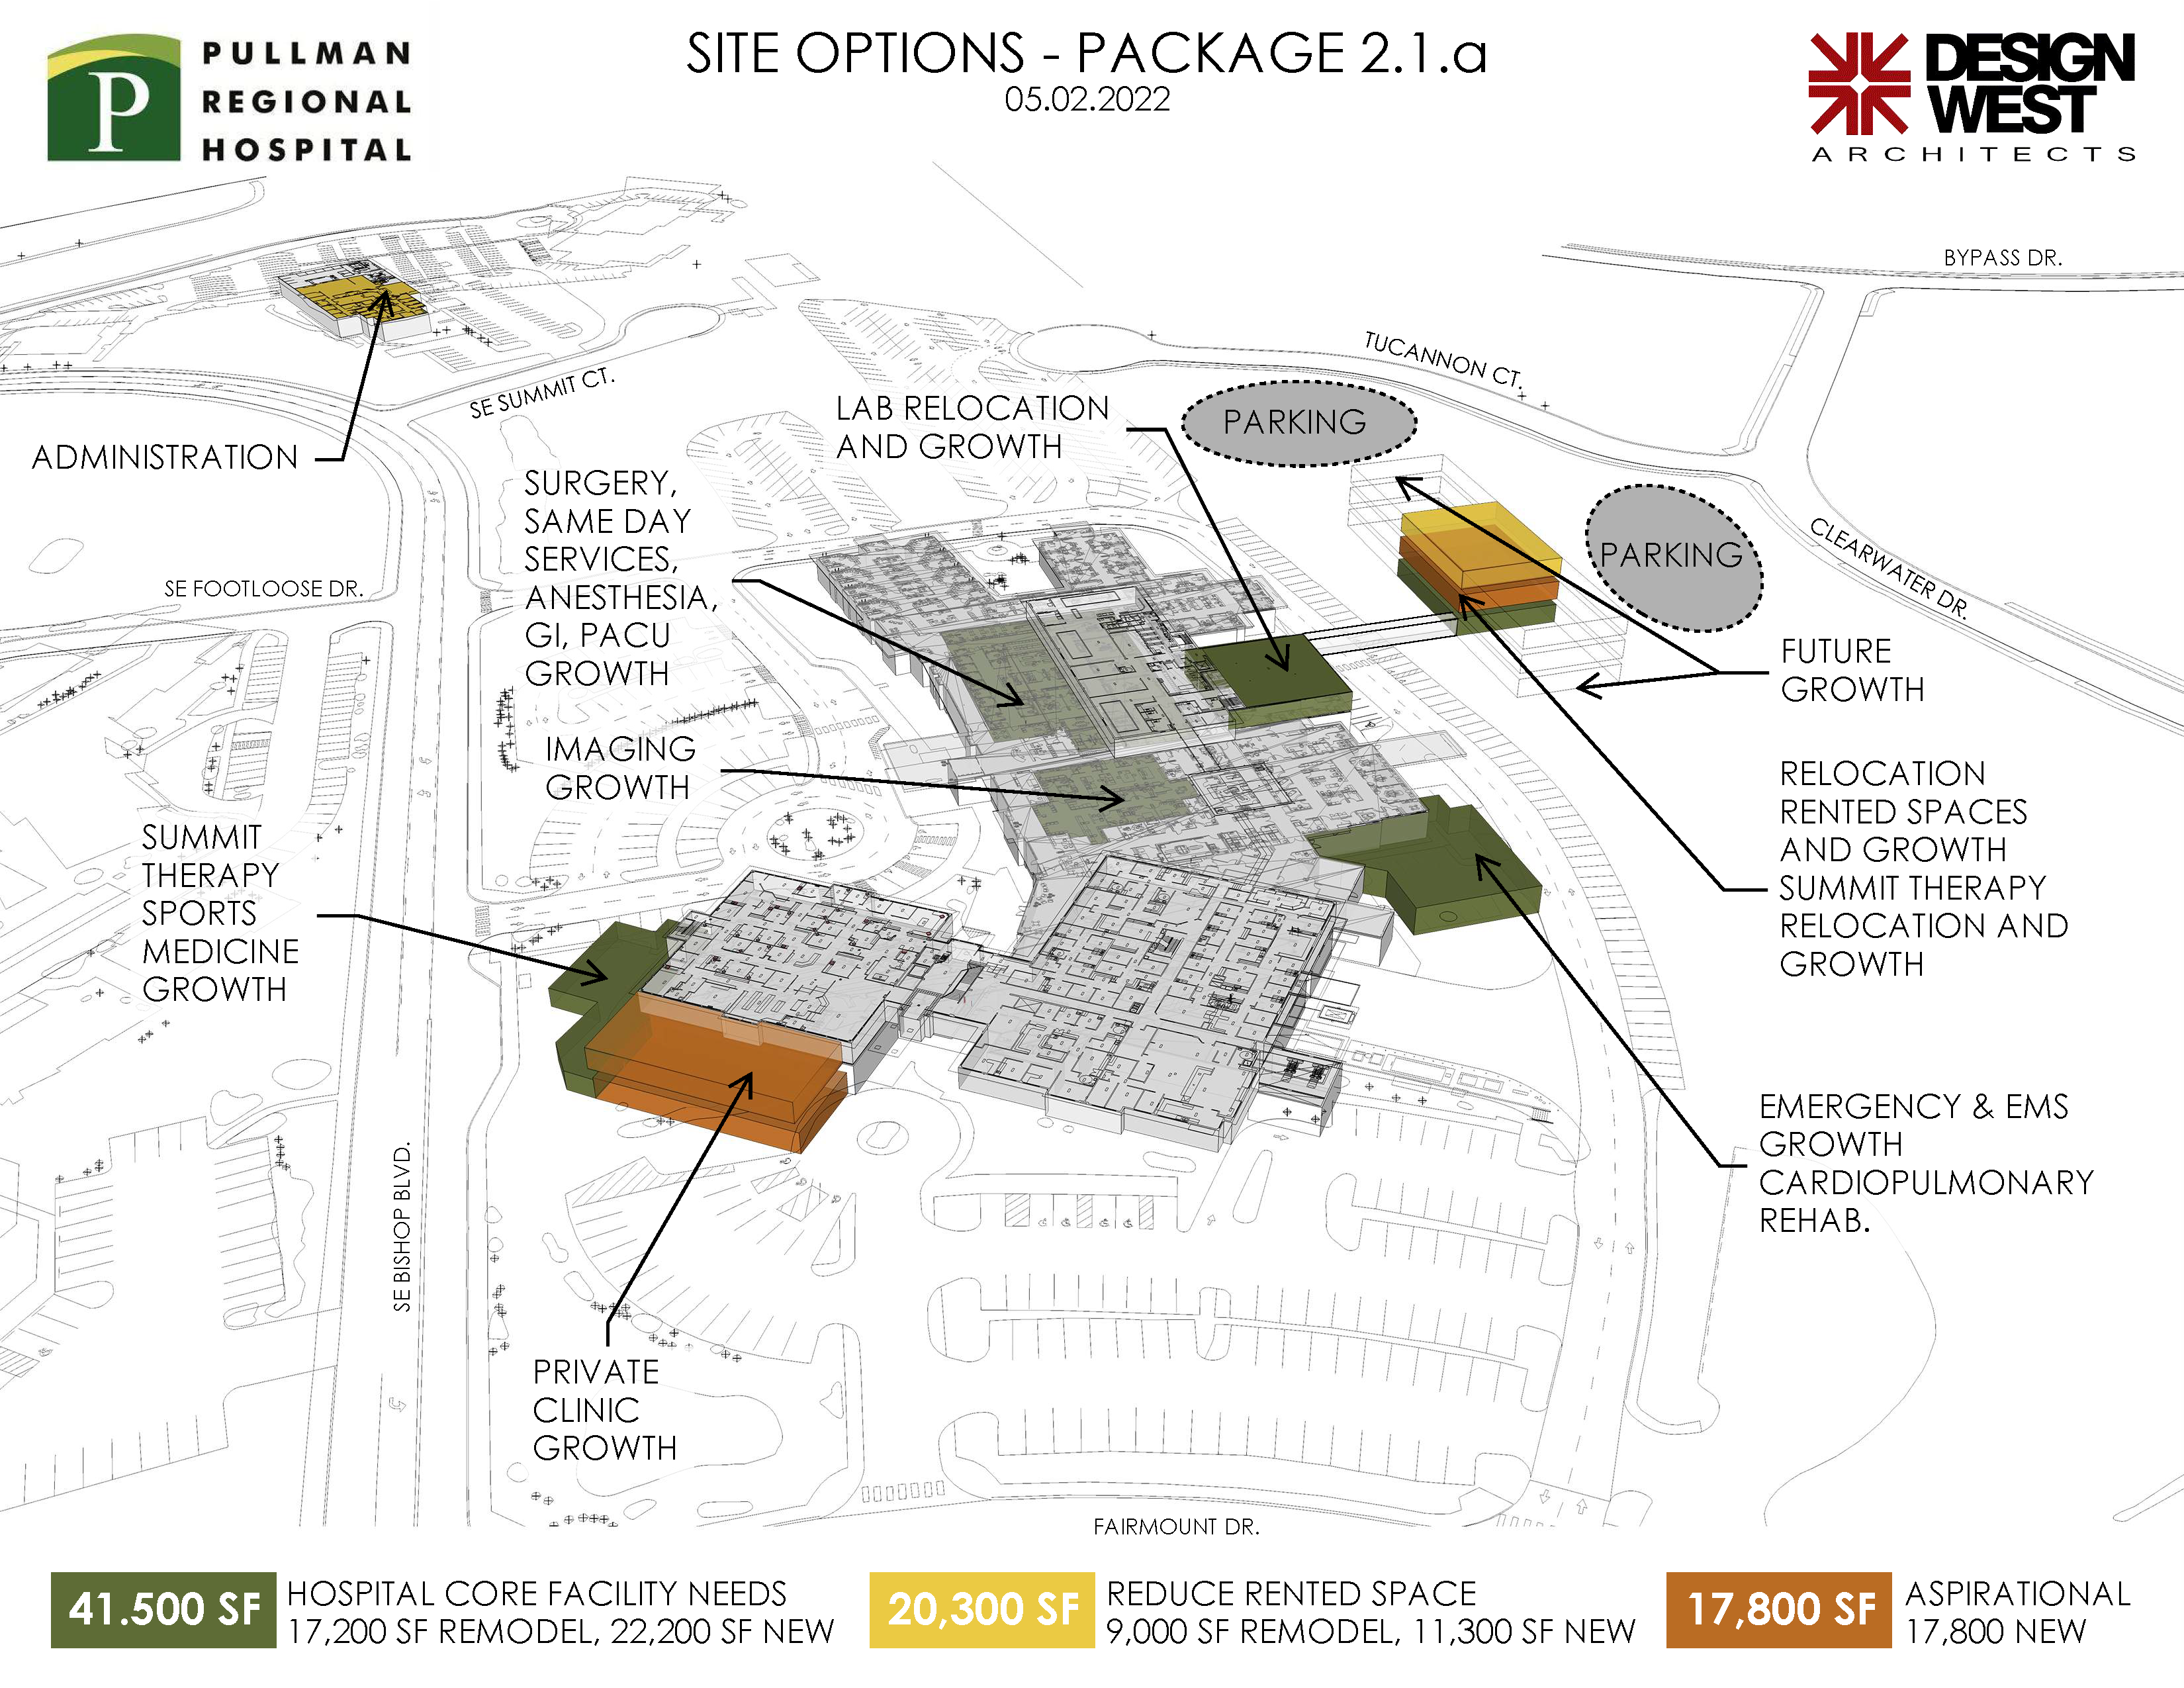 detailed picture of hospital design plan for remodel proposed for bond project